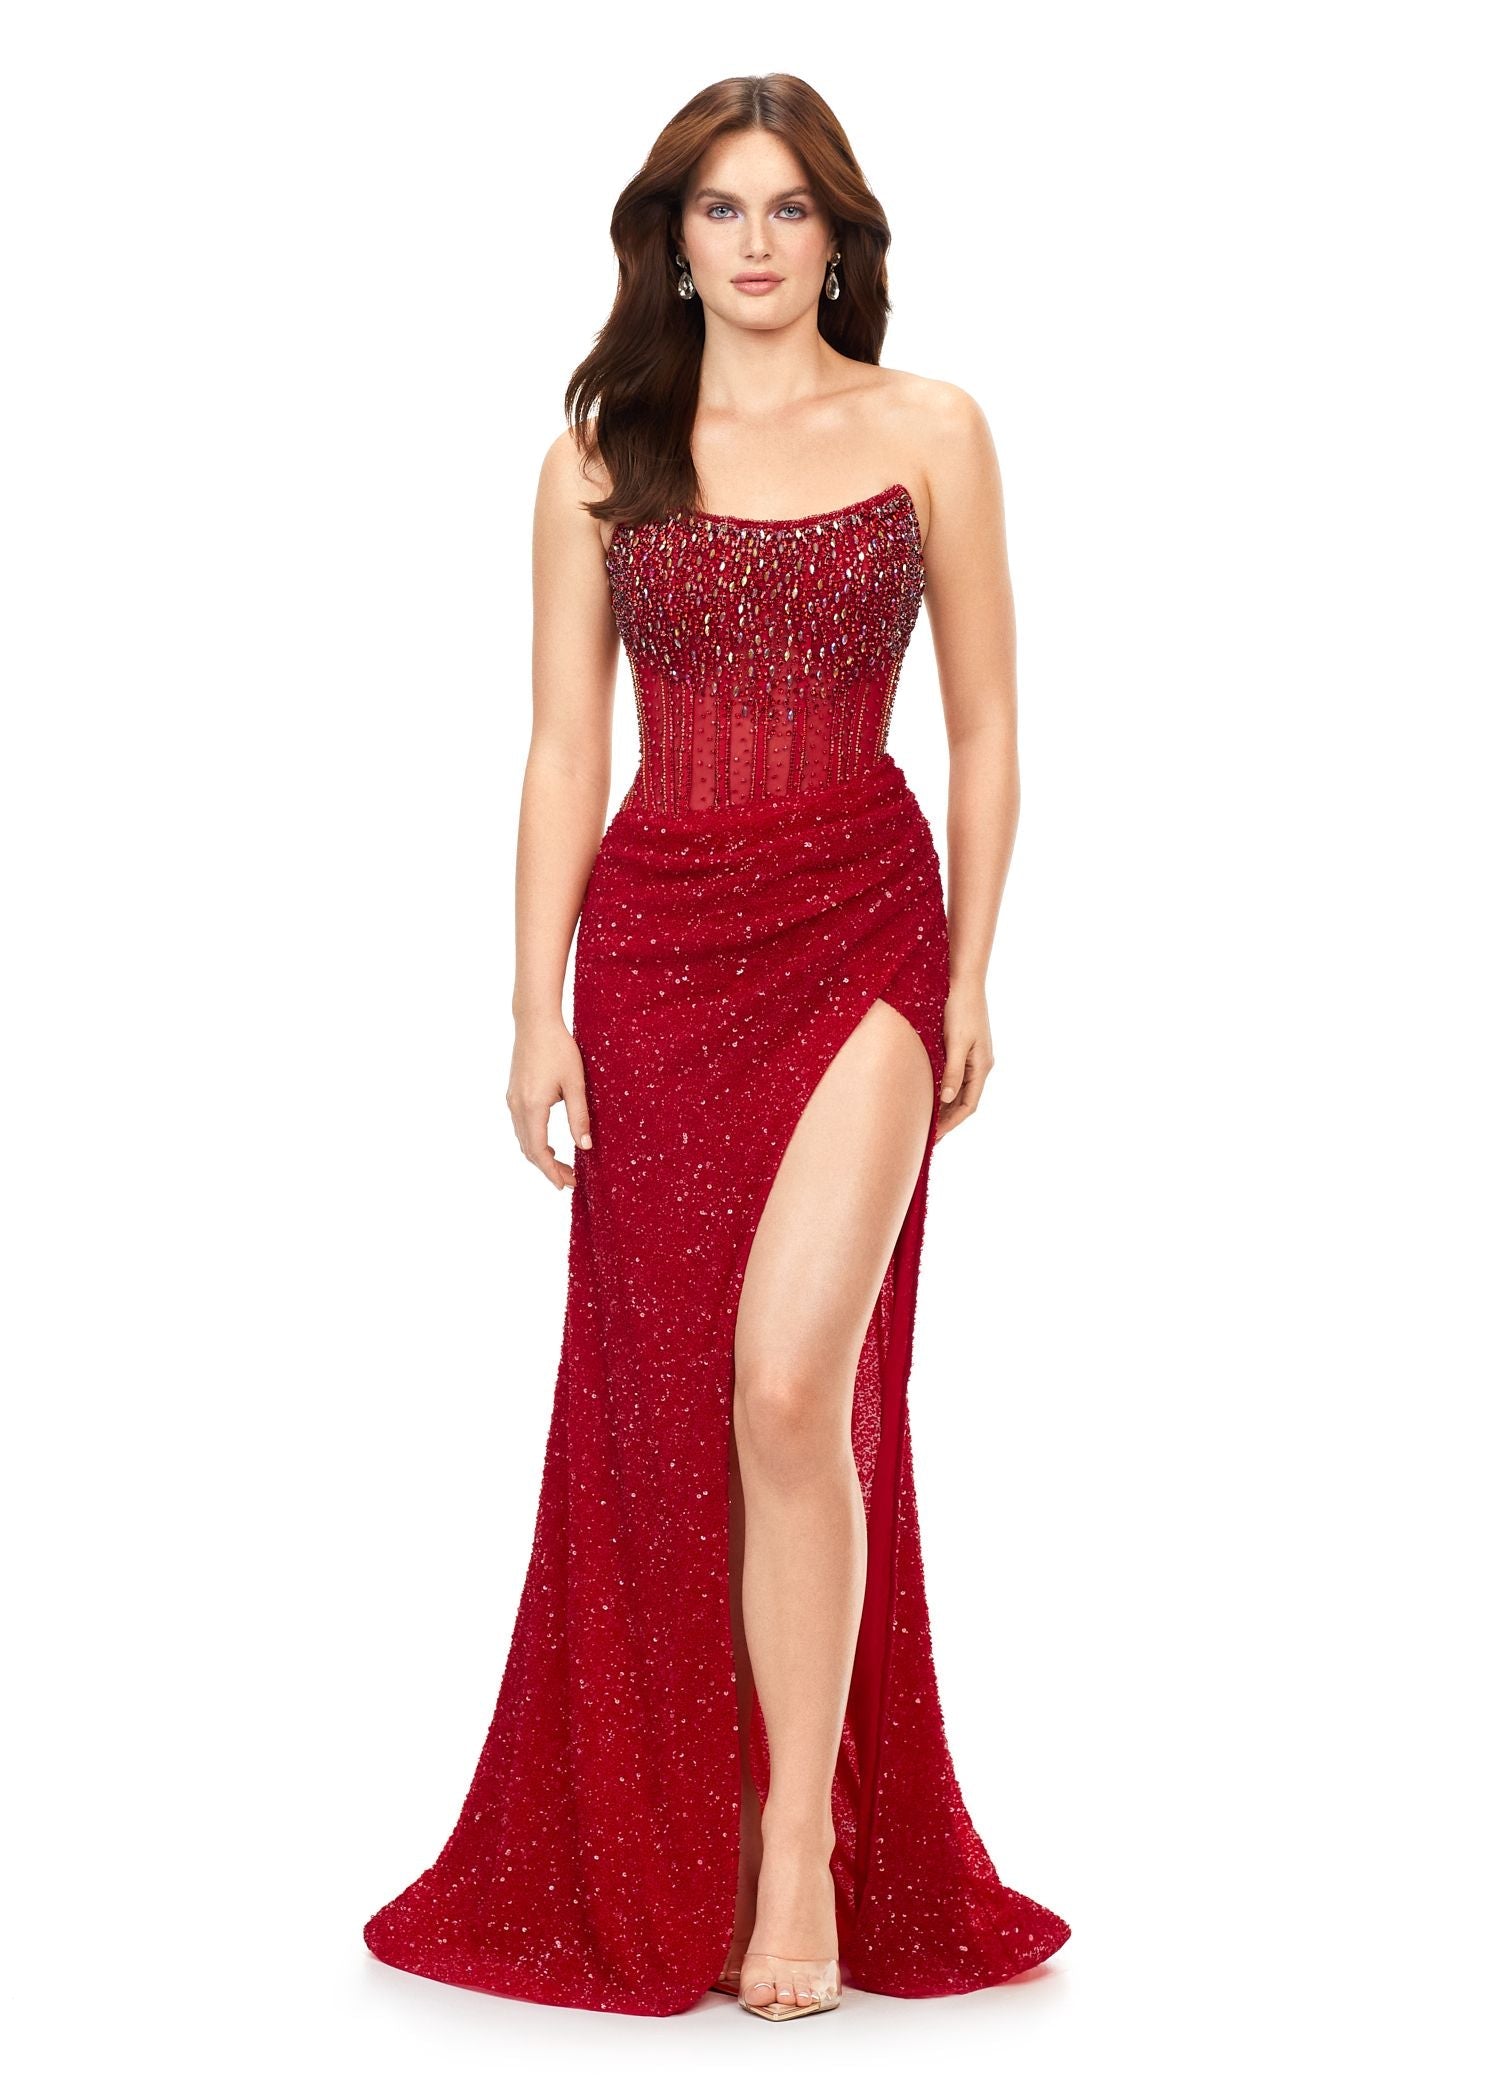 Ashley Lauren 11238 Feel like a celebrity in this jaw-dropping strapless dress. This fitted evening gown has stunning crystal beadwork on the bodice and is paired with a decadent fully beaded wrap skirt. Strapless Corset Bustier Wrap Skirt Left Leg Slit Colors:  Nude, Red